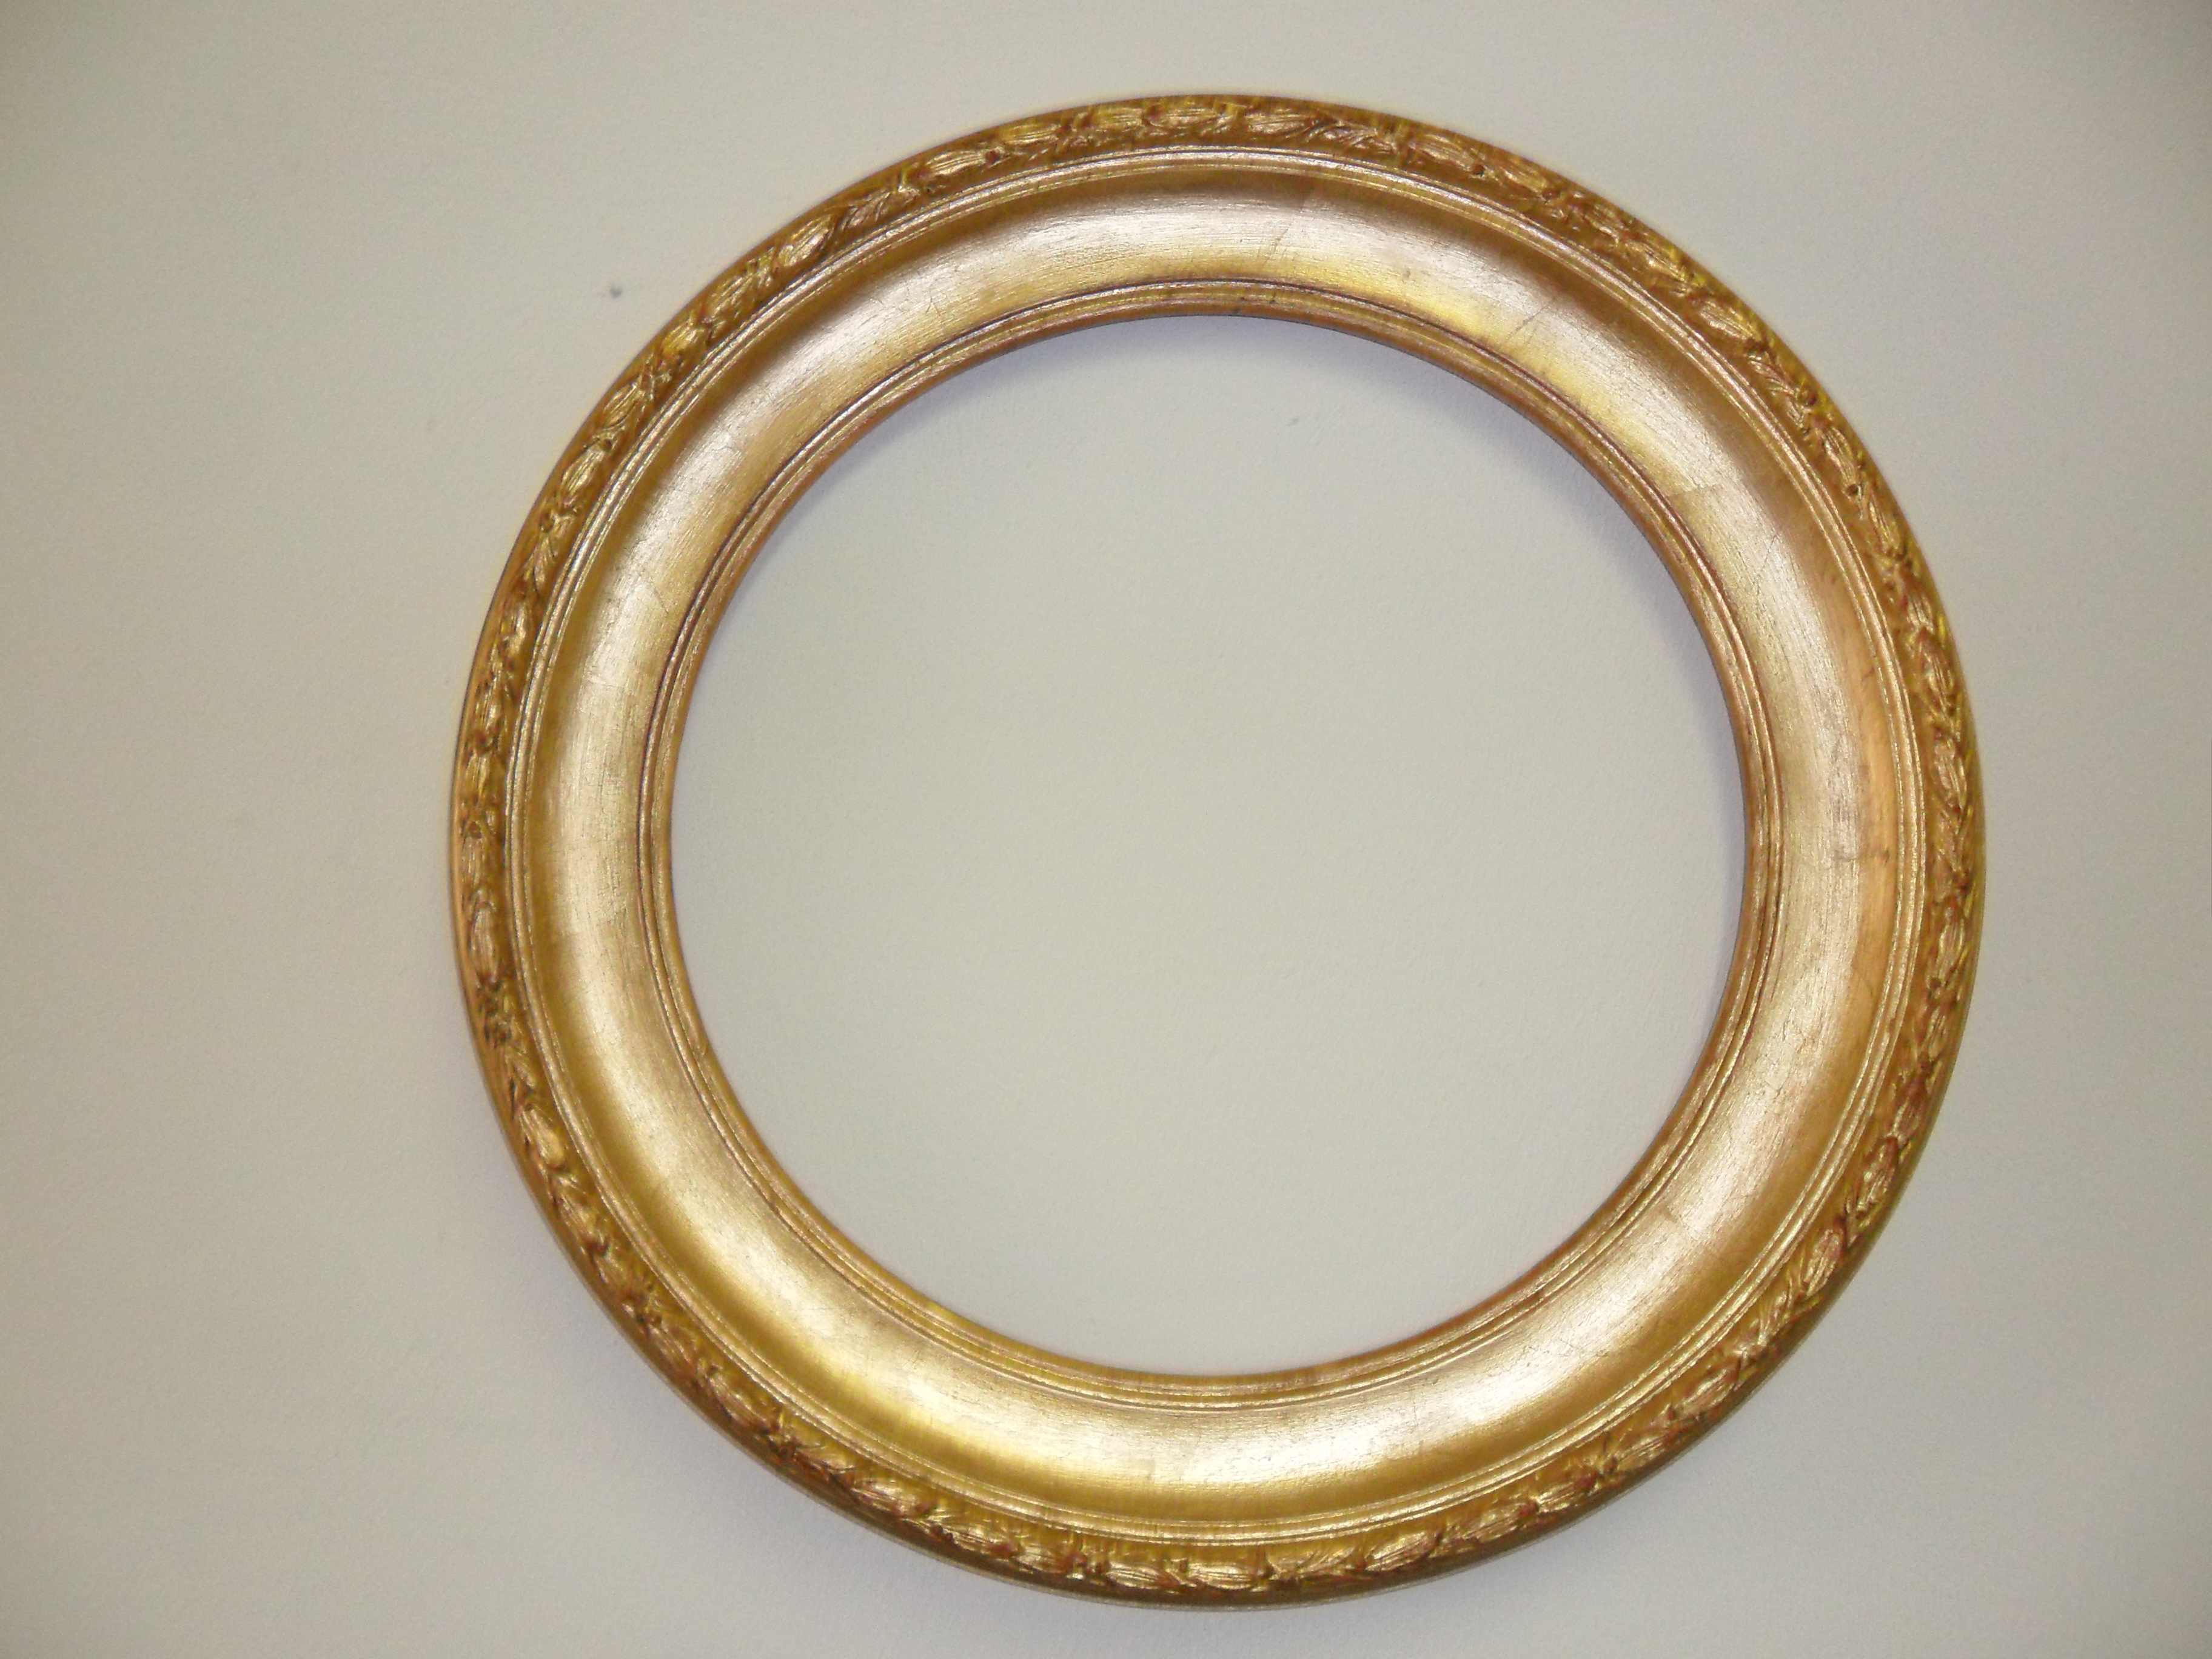 Round and oval frames